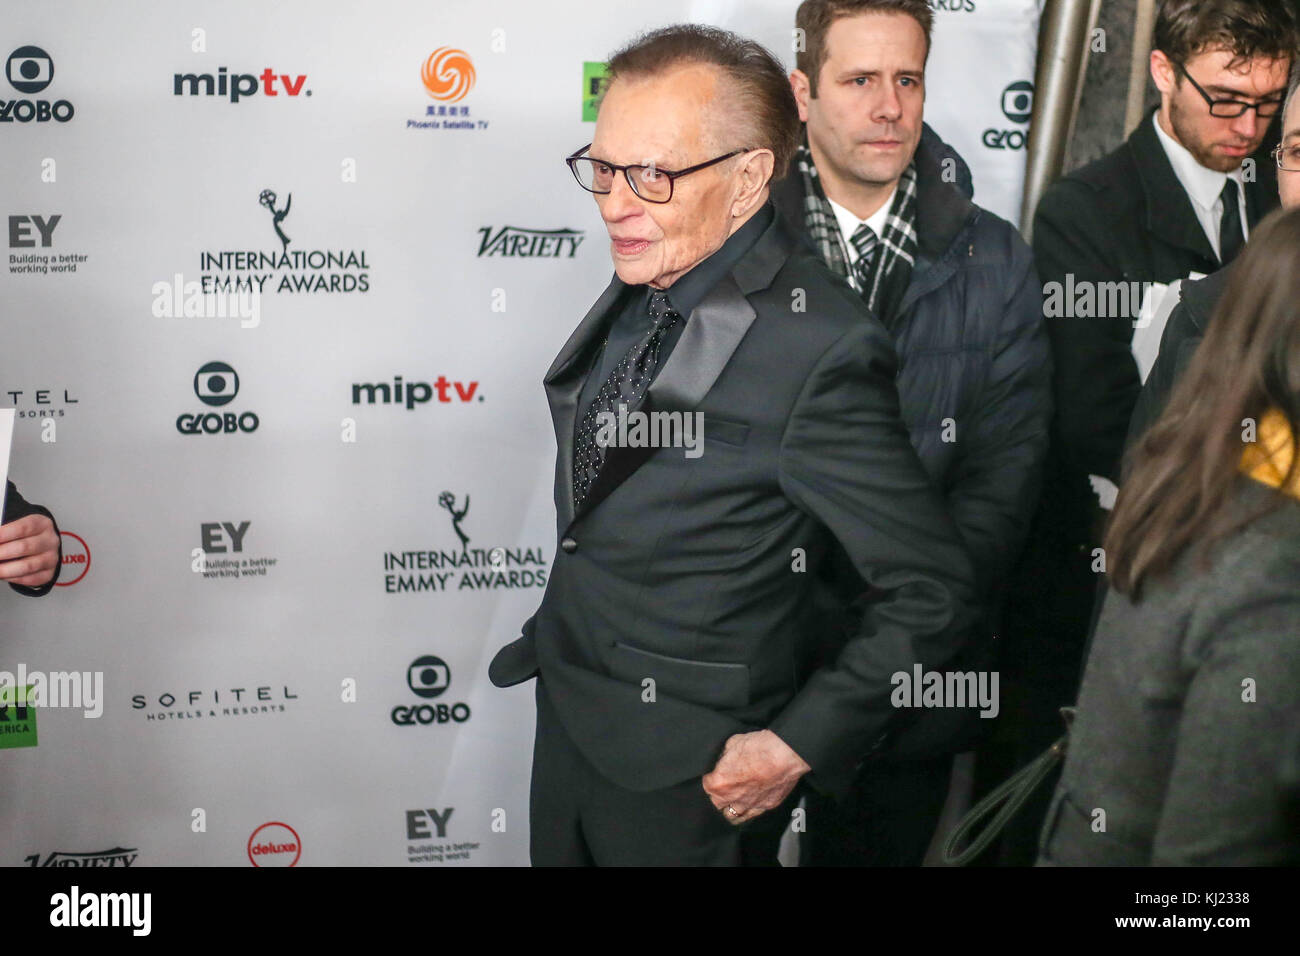 New York, USA. 20th November, 2017. Larry King during the 45th International Emmy awards gala in New York city on November 20, 2017. The International Emmy Award is an award ceremony bestowed by the International Academy of Television Arts and Sciences in recognition to the best television programs initially produced and aired outside the United States.   (PHOTO: WILLIAM VOLCOV/BRAZIL PHOTO PRESS) Stock Photo